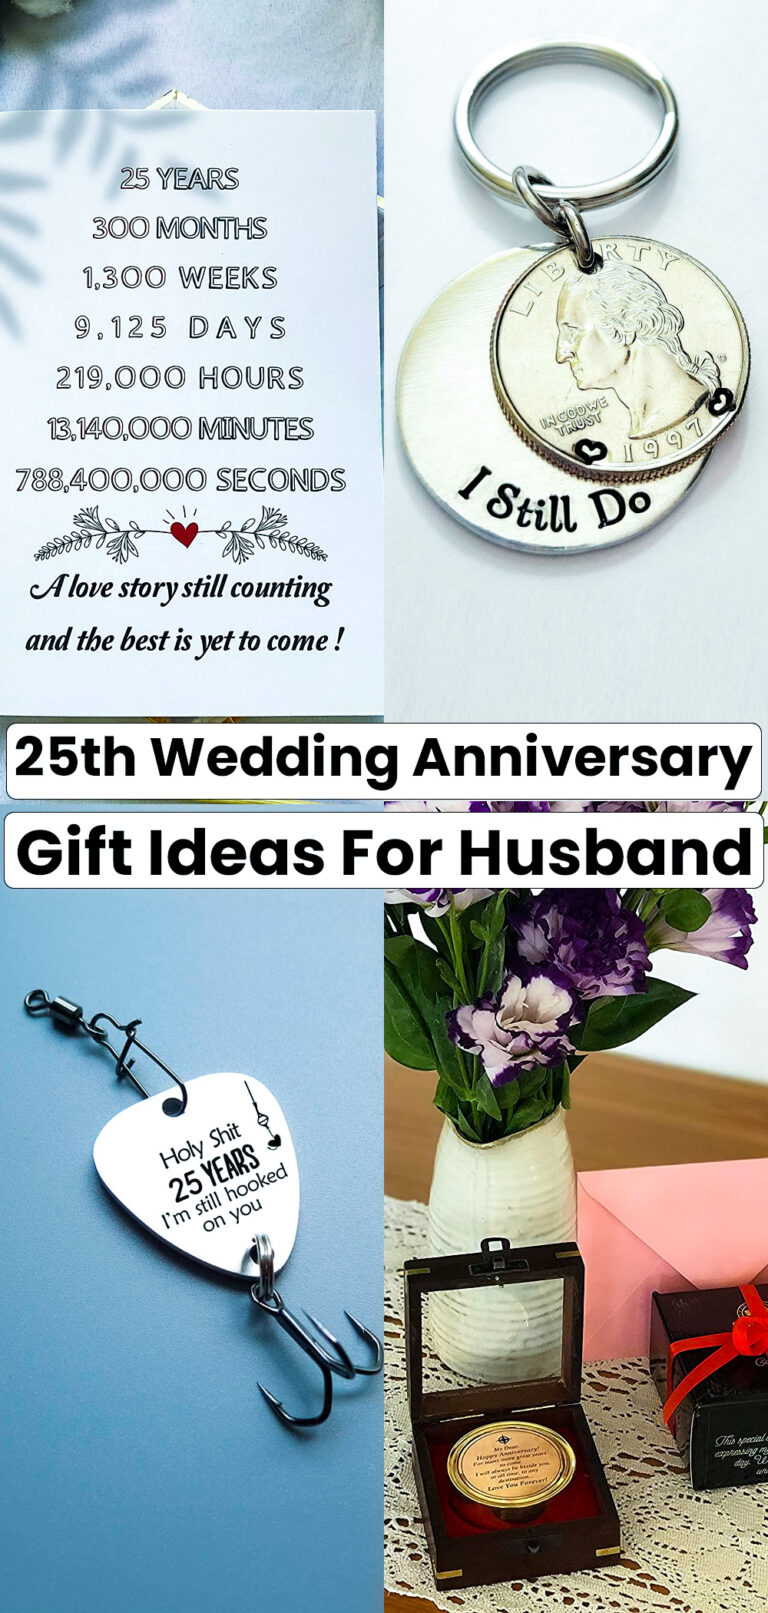 25th Wedding Anniversary Gift Ideas for Husband